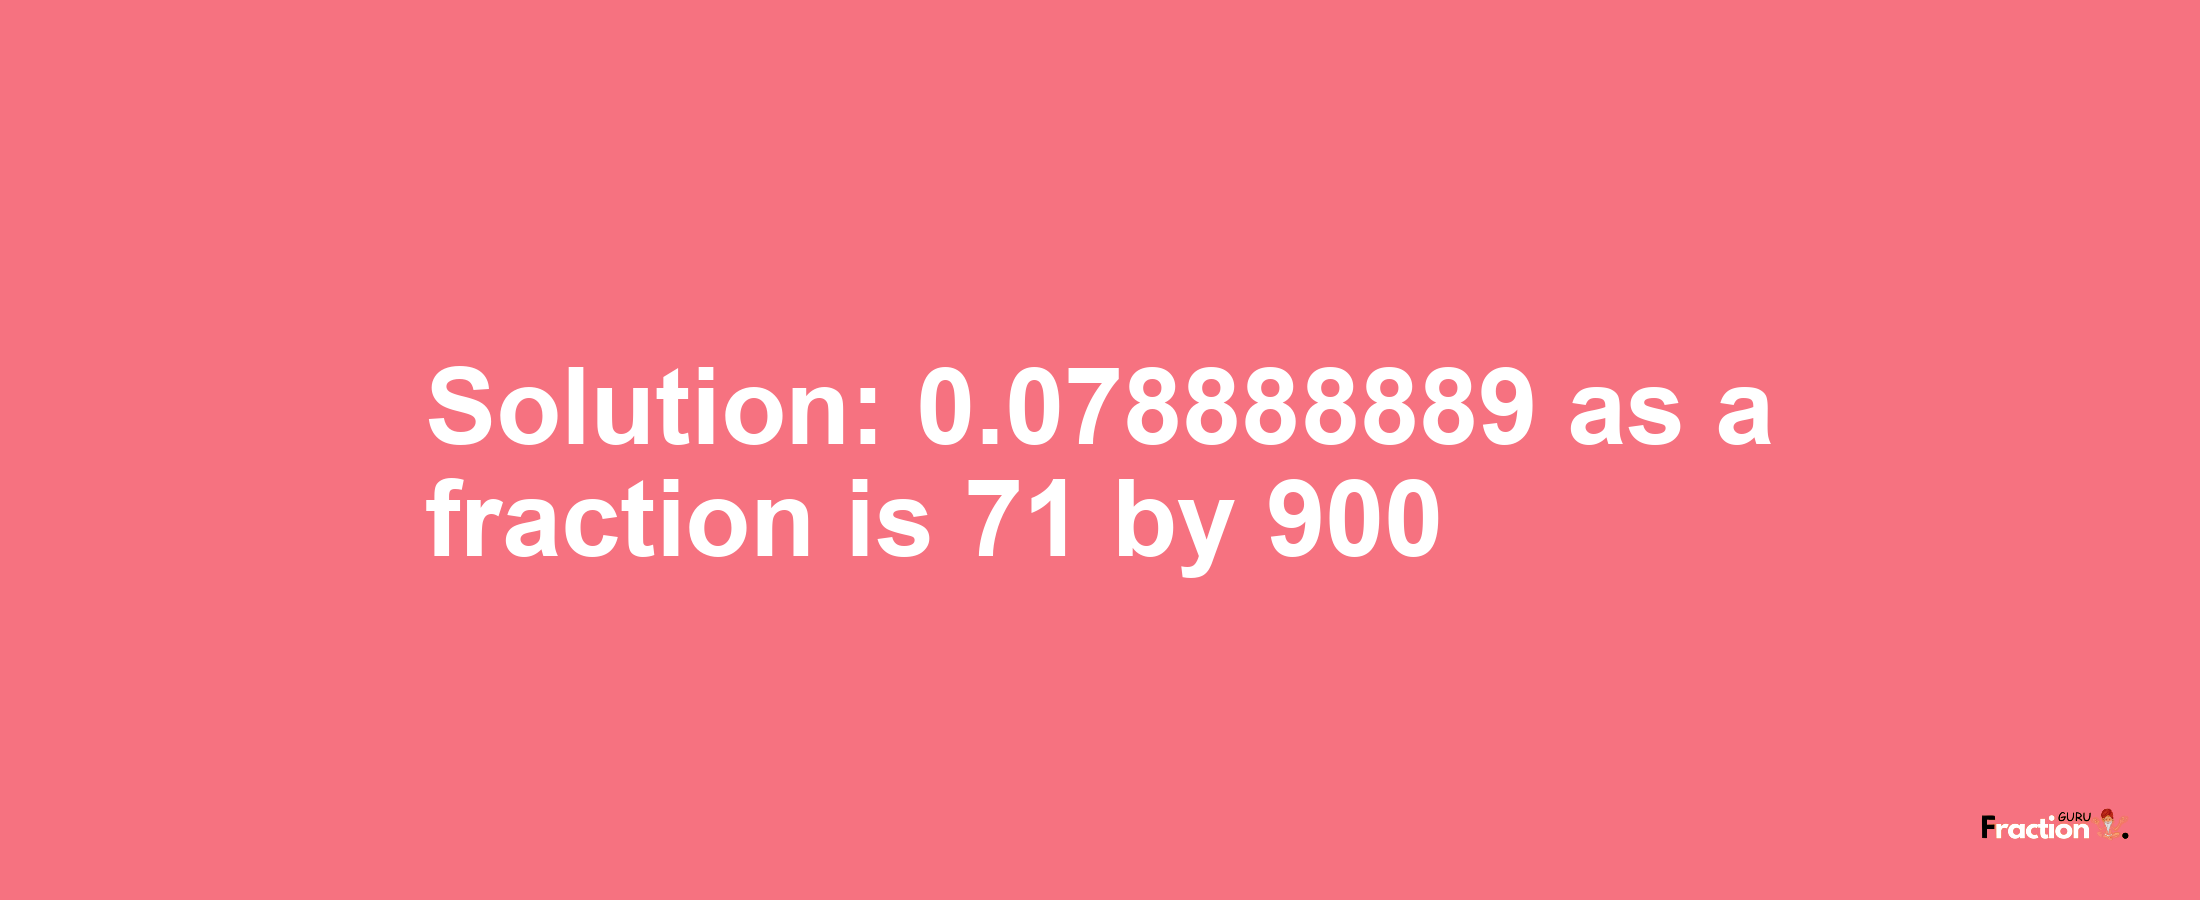 Solution:0.078888889 as a fraction is 71/900